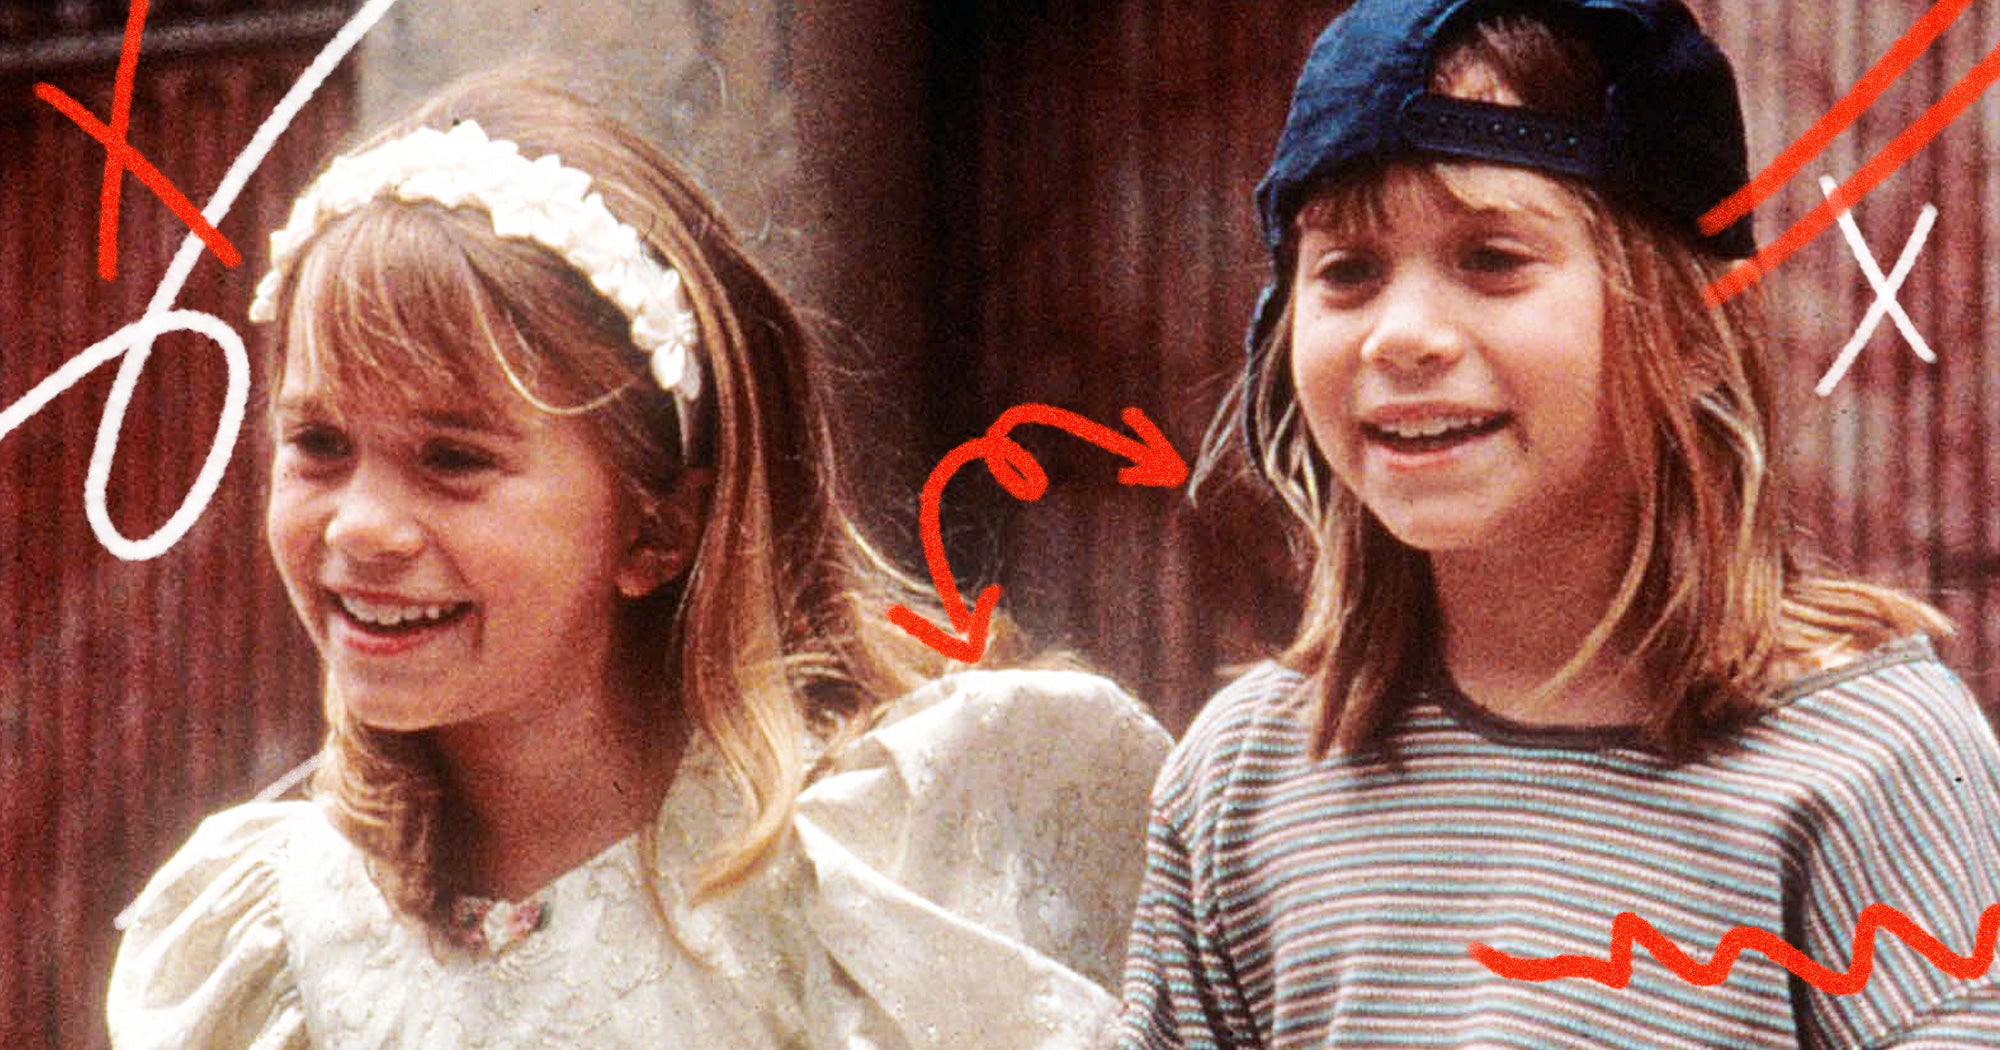 It Takes Two - Publicity still of Mary-Kate Olsen